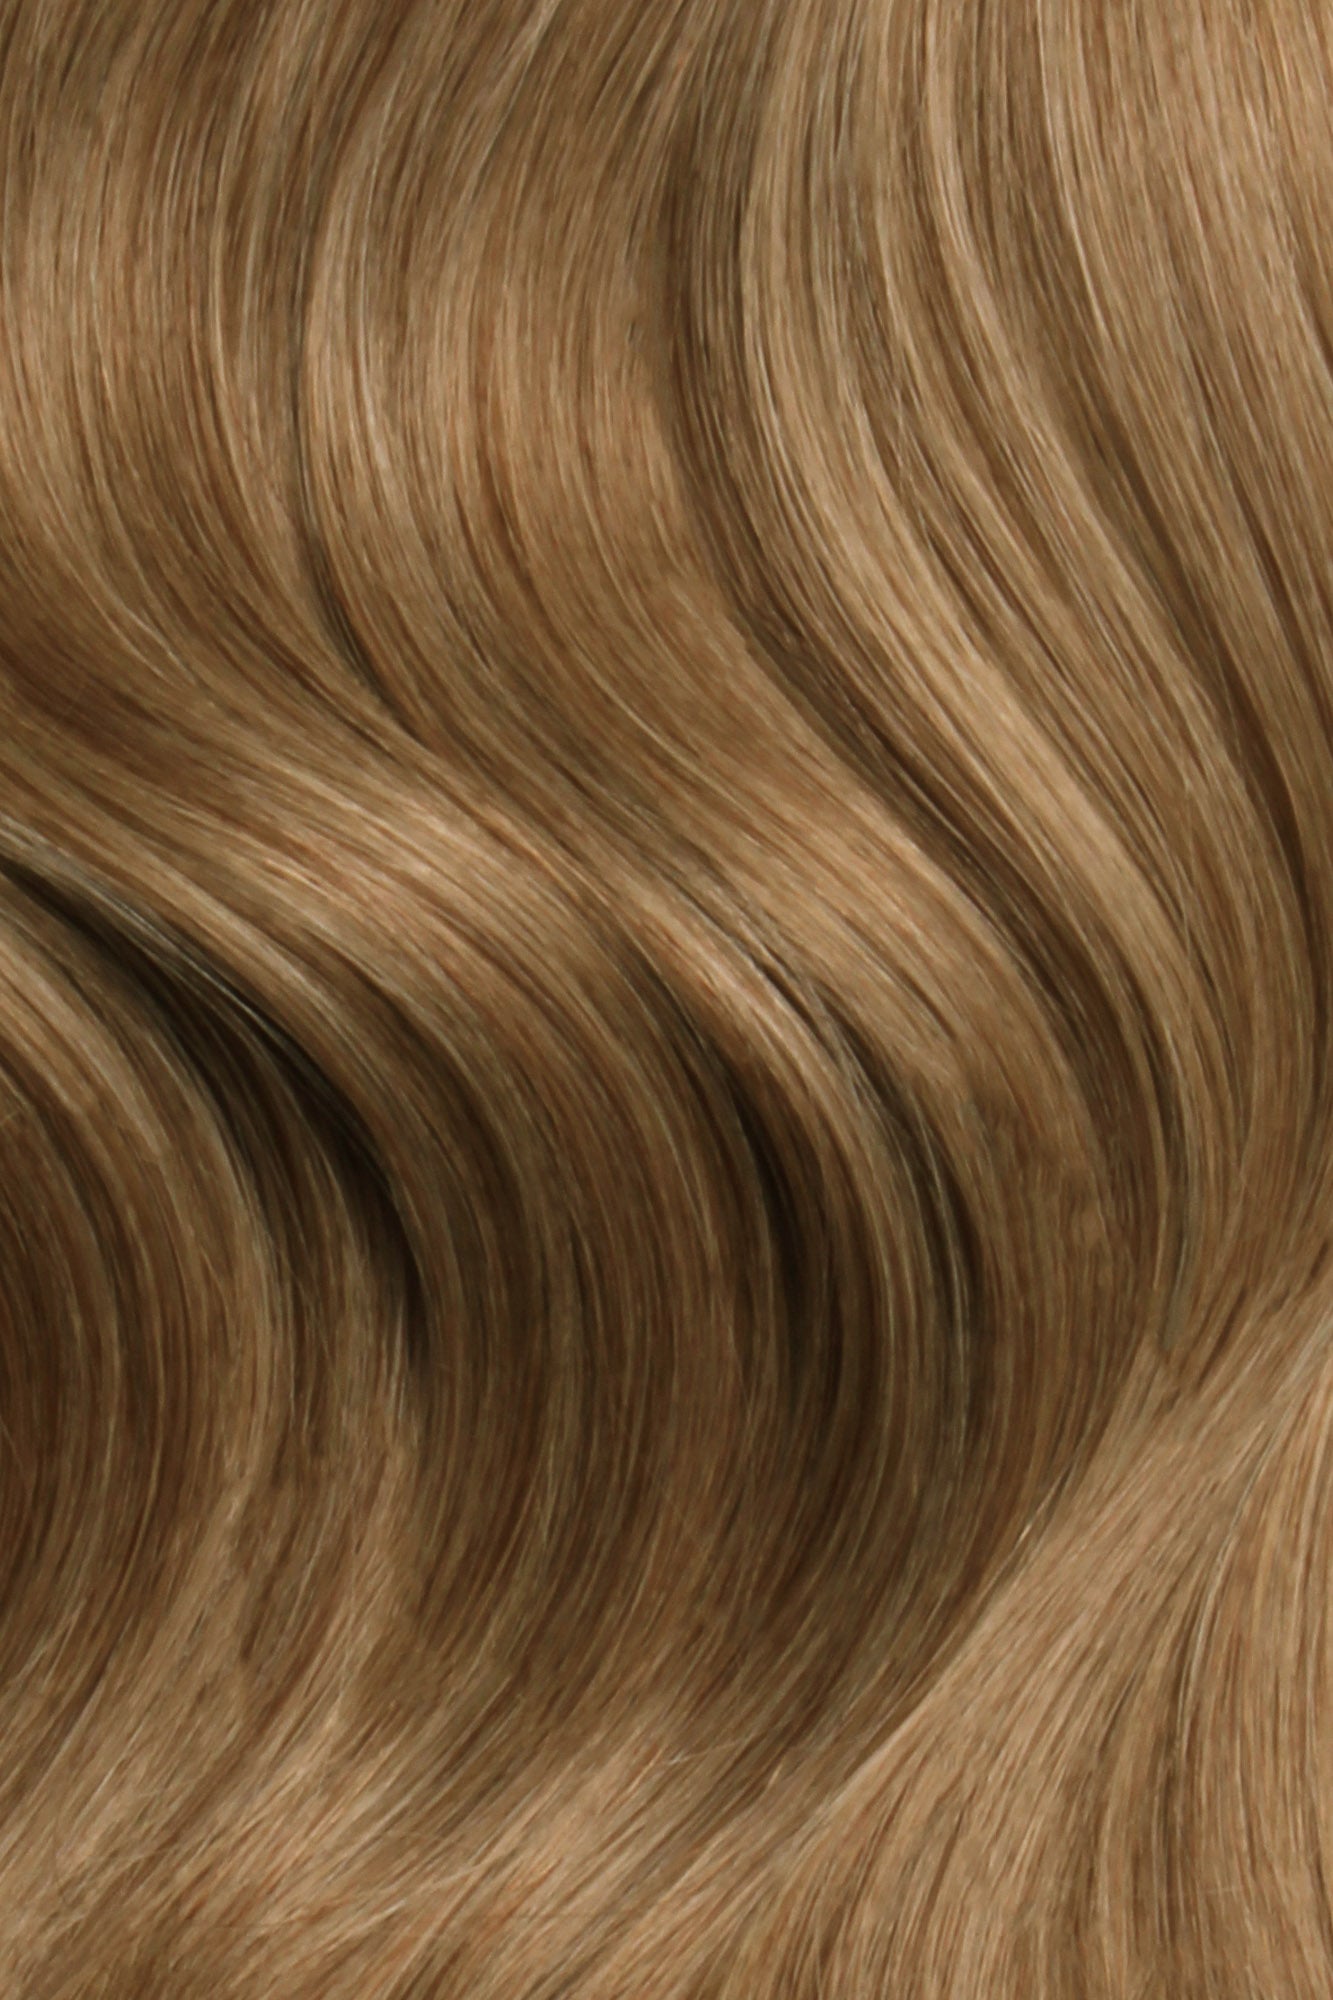 SEAMLESS® Flat Weft 18 Inches - SWAY Hair Extensions Chestnut-Blonde-Mix-6-24 Natural SEAMLESS® Flat Weft 18 Inches extensions. Thin, flexible, and discreet. 100% Double Drawn Remy Human Hair. Versatile and reusable